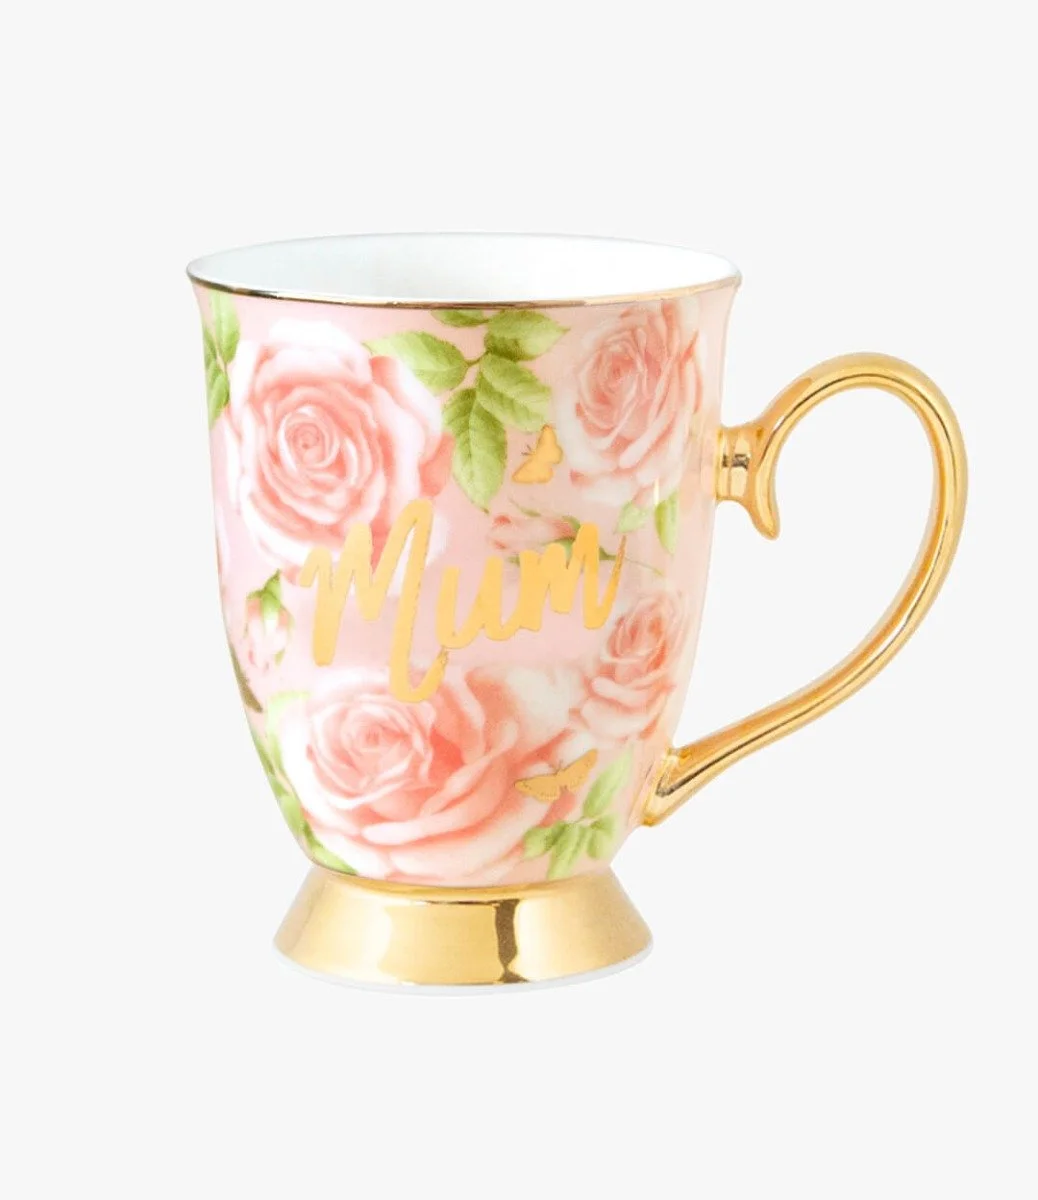 Mum - Butterfly Roses - Mug  By Cristina Re